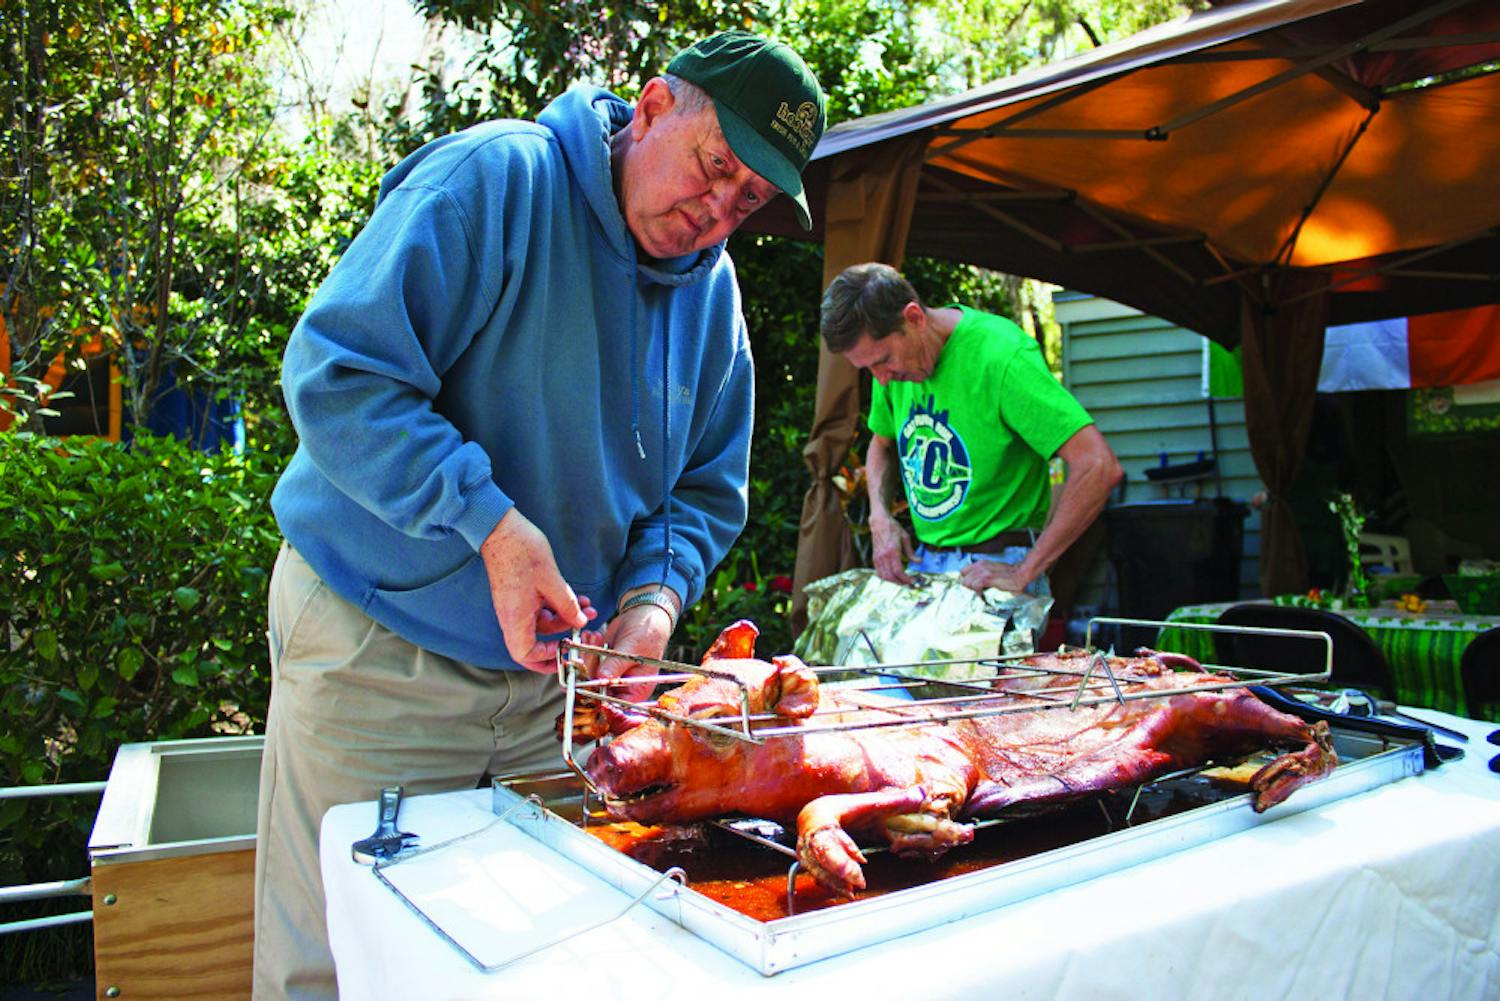 Larry King, 76, loosens a rack holding a roasted pig as Jim Ferrer, 66, makes a tent out of aluminum foil to keep it warm for a day-after-St. Patrick's Day party at the corner of Northwest 14th Avenue and Northwest 18th Street on Saturday. King and Ferrer roasted the pig for about four hours before serving it. 